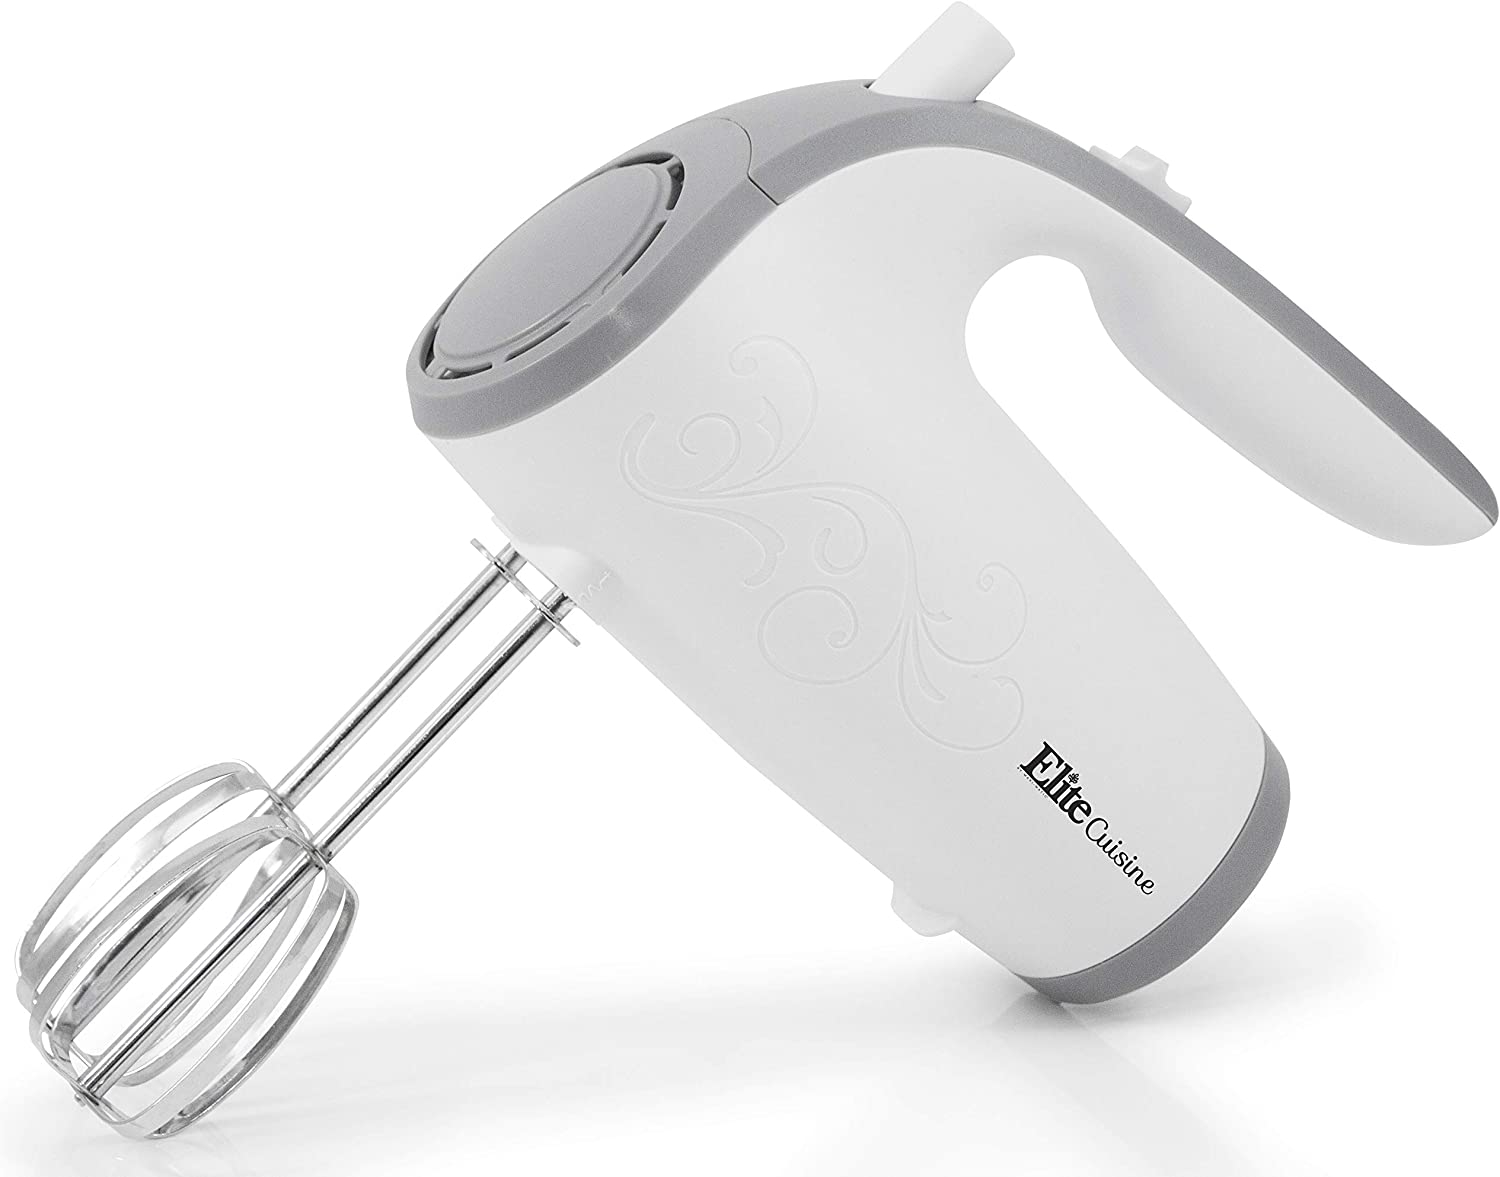 Elite Gourmet EHM-003X Ultra Power Electric 5-Speed Kitchen Hand Mixer, White Import To Shop ×Product customization General